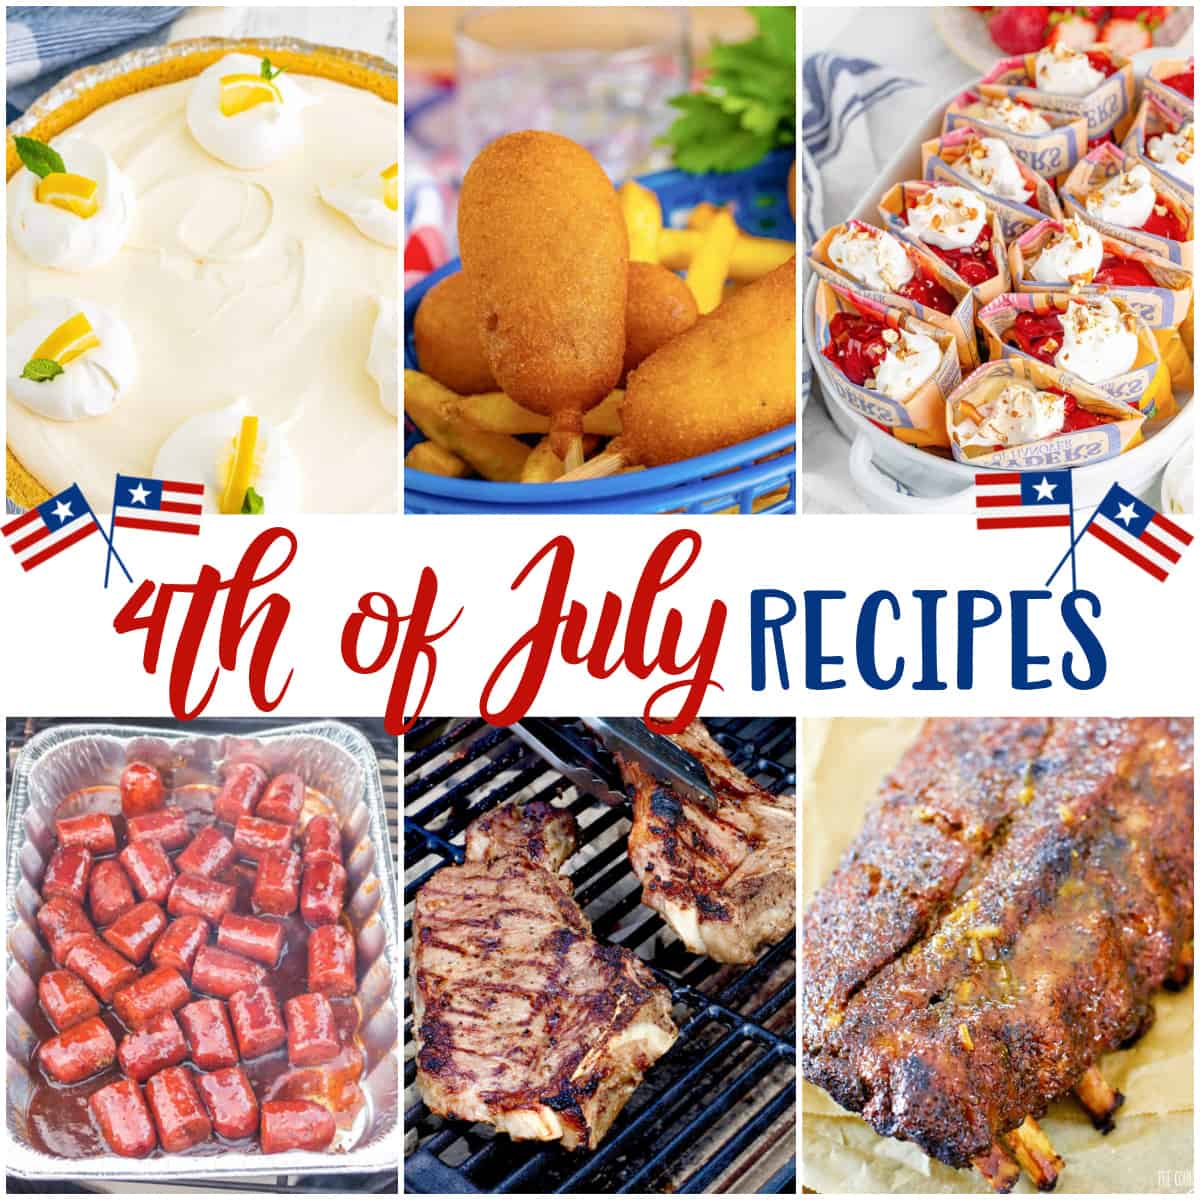 4th of July recipes.